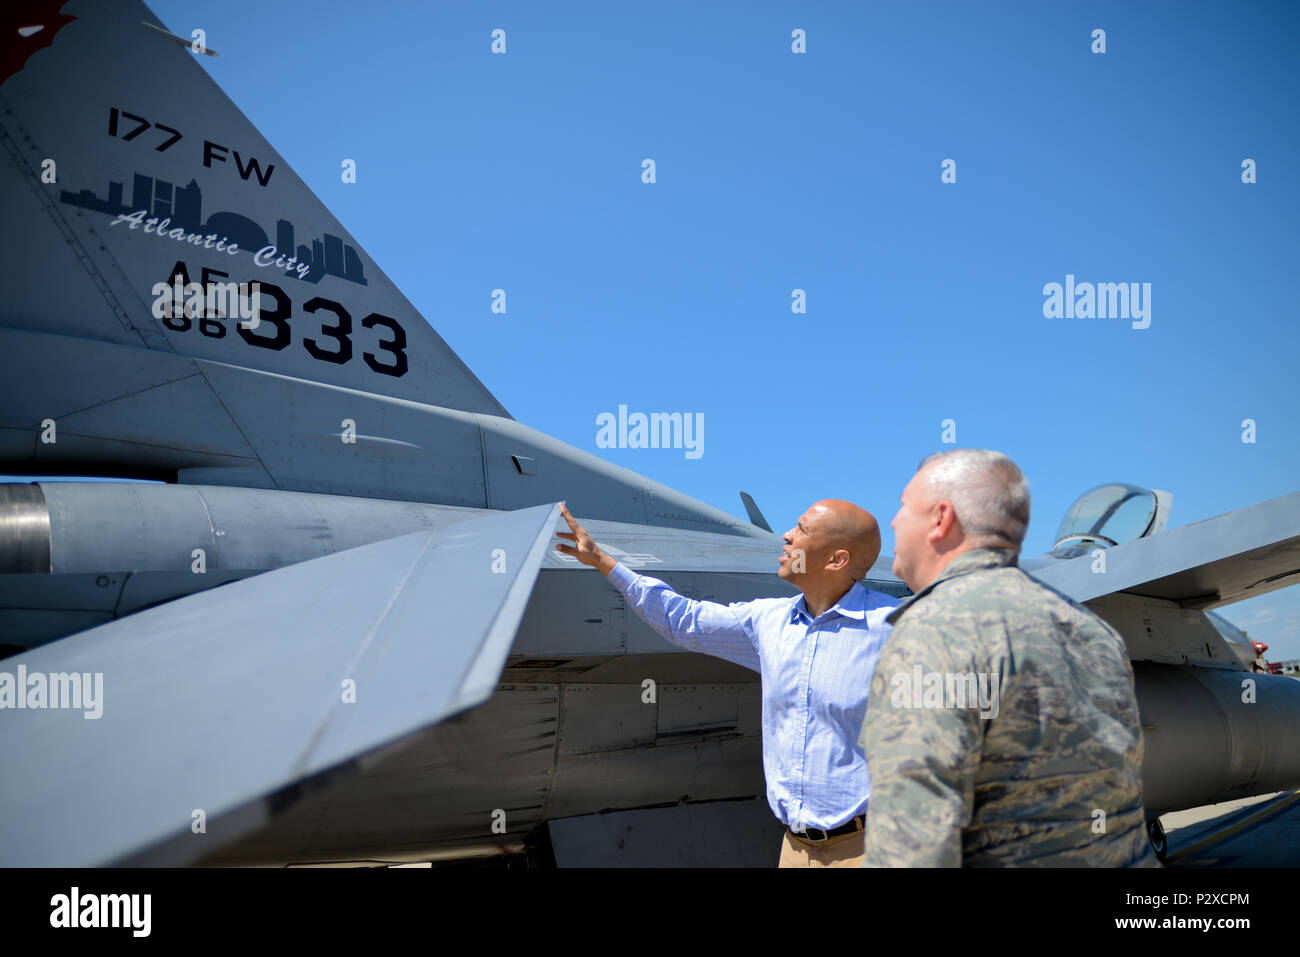 U.S. Sen. Cory Booker and the Adjutant General of the New Jersey National Guard, Brig. Gen. Michael L. Cunniff, discuss the flight parameters of an F-16 fighter jet during a visit to the 177th Fighter Wing in Egg Harbor Township, N.J. on Aug. 5, 2016. It was the first visit to the New Jersey Air National Guard base by Sen. Booker, who received a briefing by the Wing Commander, U.S. Air Force Col. John R. DiDonna, flew an F-16 simulator and got a chance to get an up close look at an F-16C Fighting Falcon fighter jet on the flight line at the Atlantic City Air National Guard base. (U.S. Air Nati Stock Photo